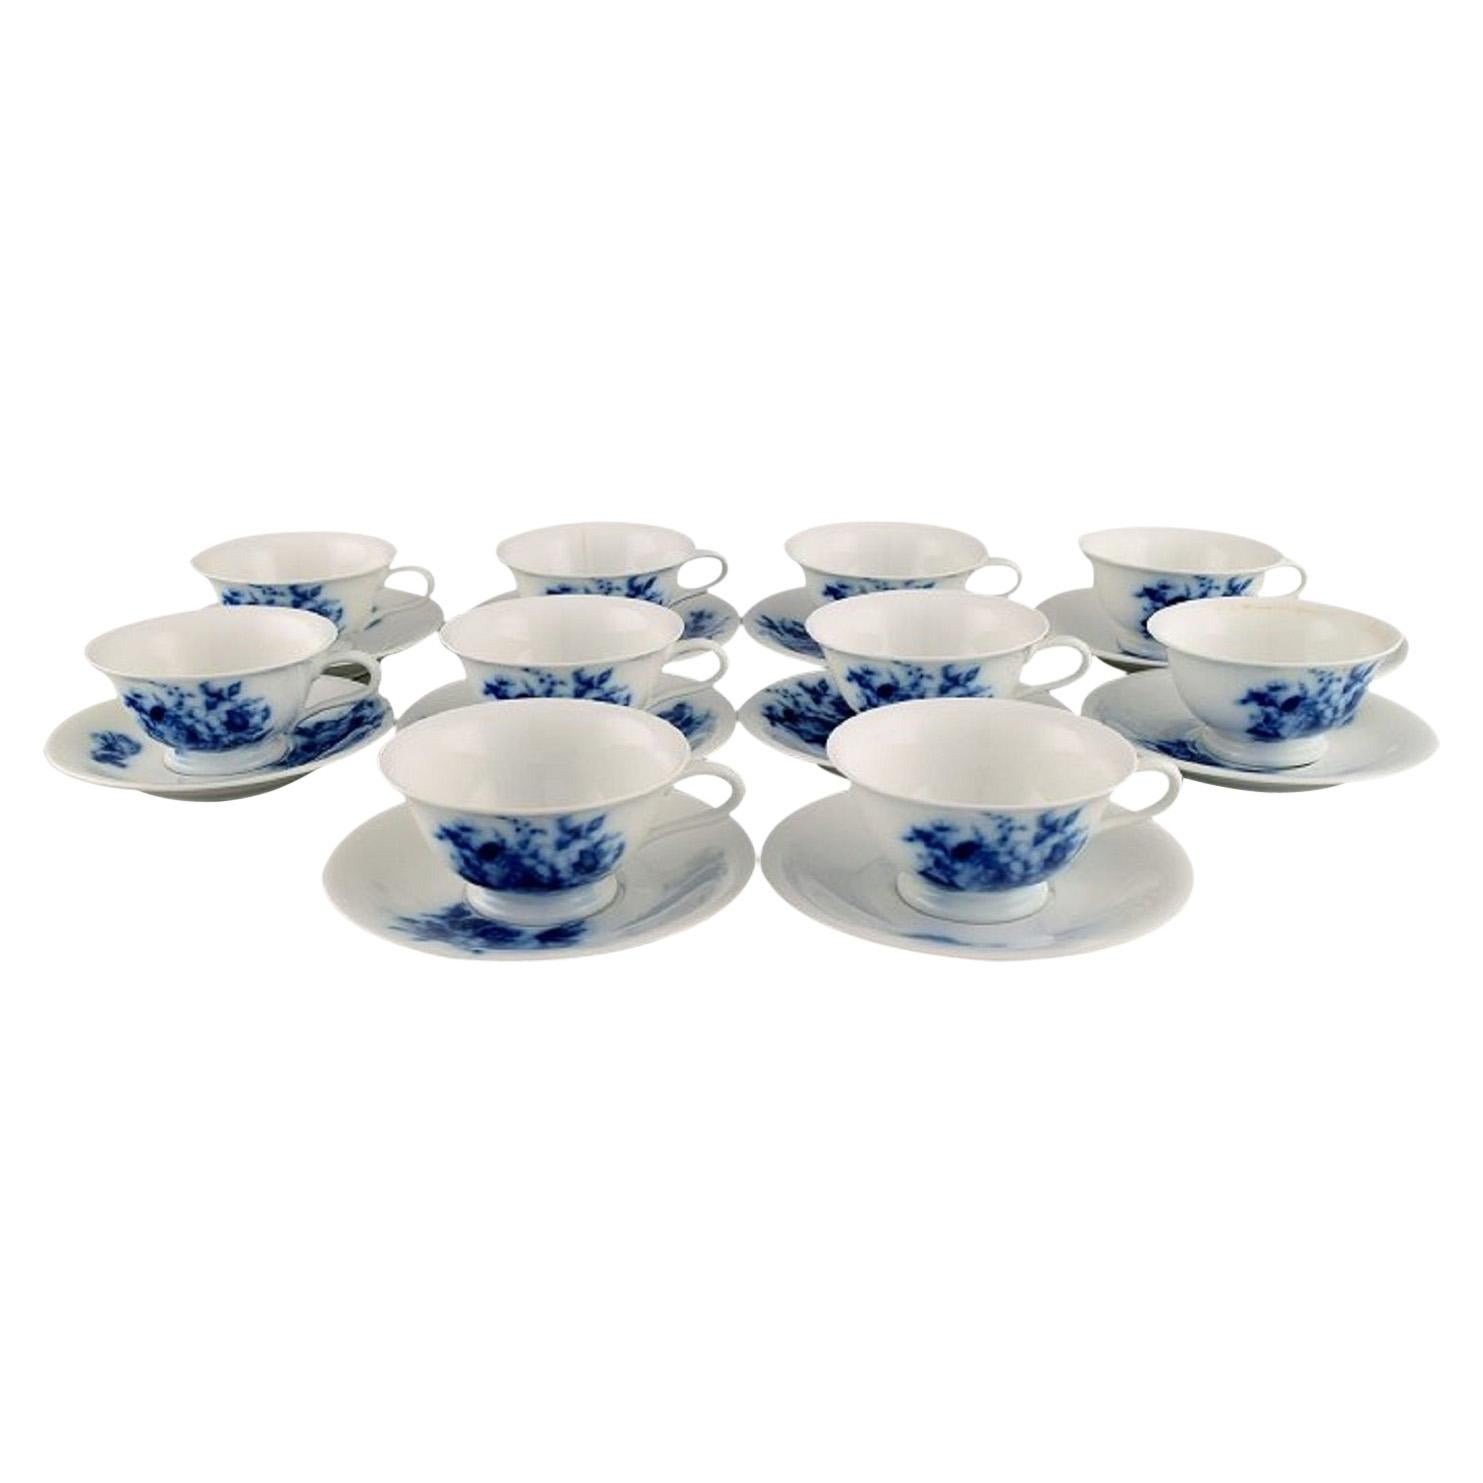 Rosenthal Tea Service for 10 People in Hand-Painted Porcelain, 1930s / 40s